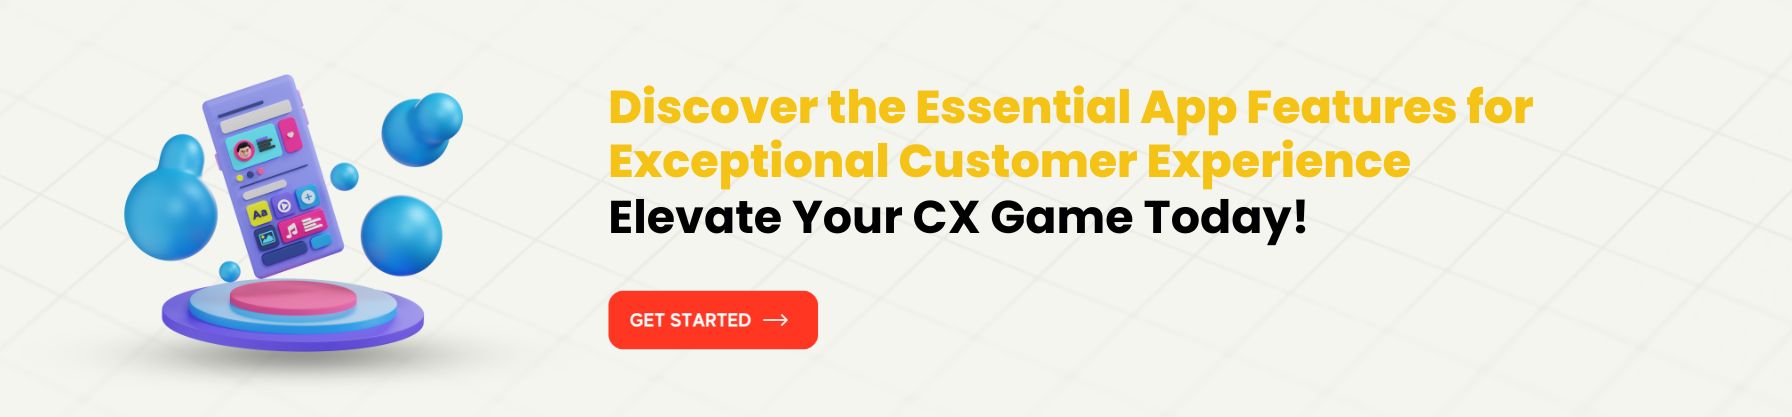 Top App Features You Must Have for Great Customer Experience (CX)-CTA Button